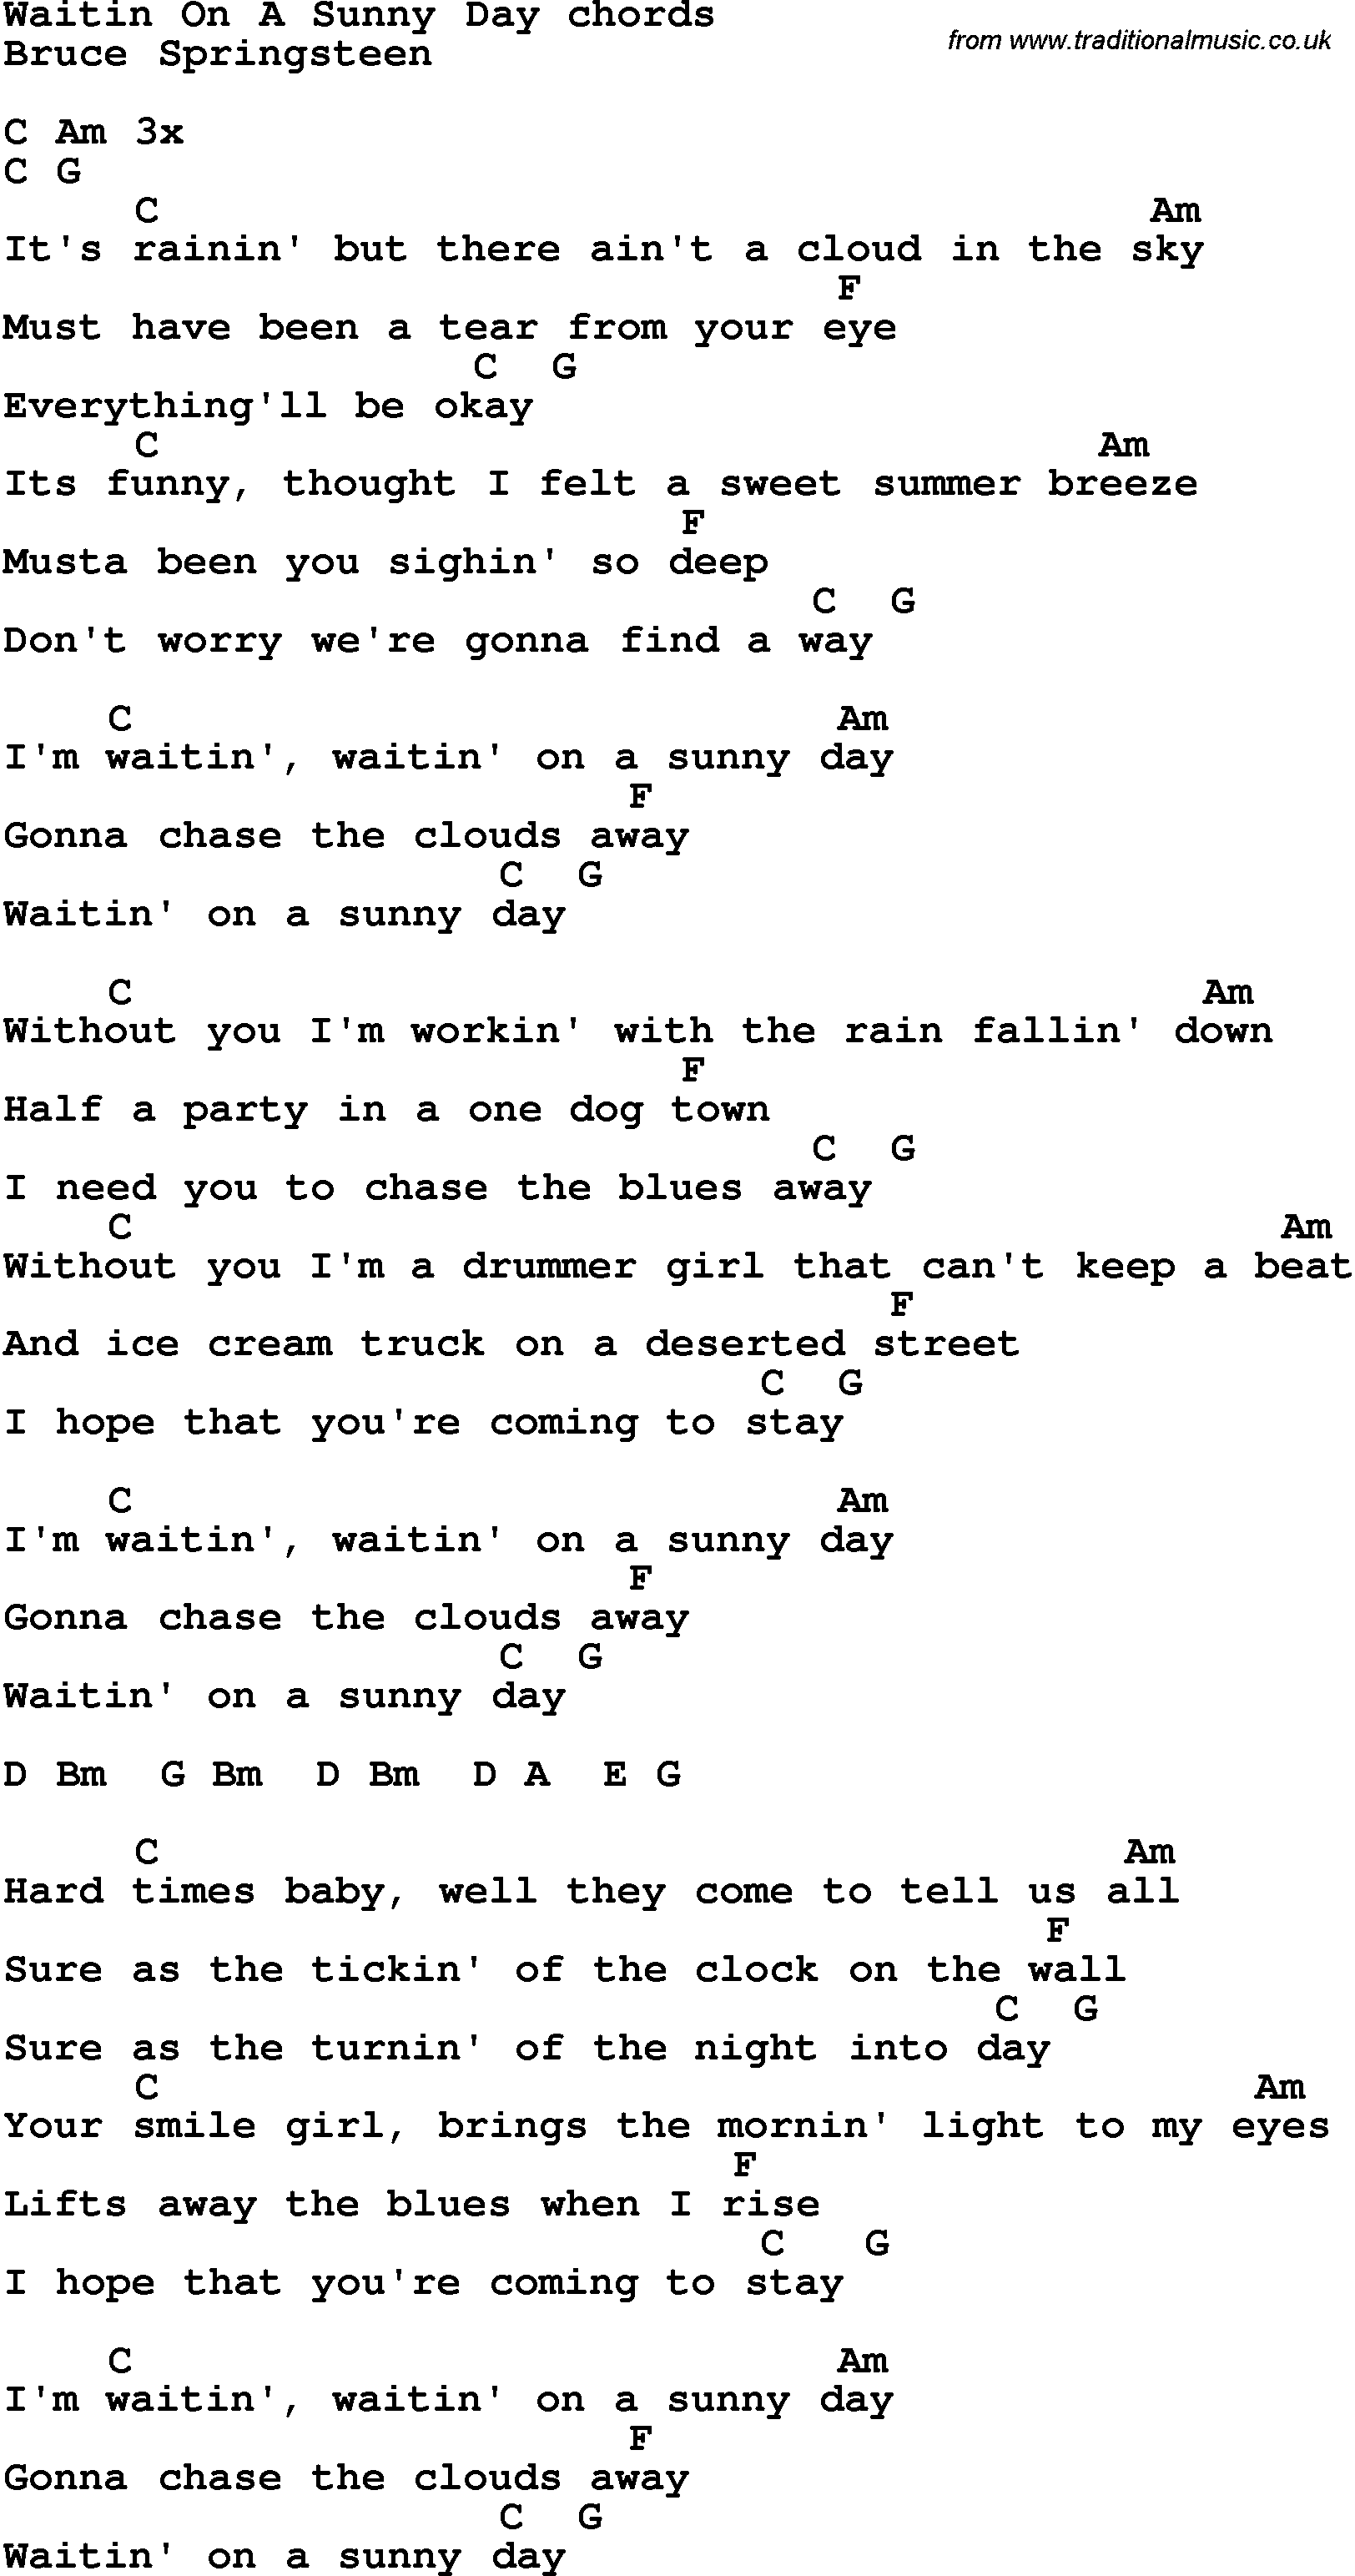 Song Lyrics with guitar chords for Waitin' On A Sunny Day